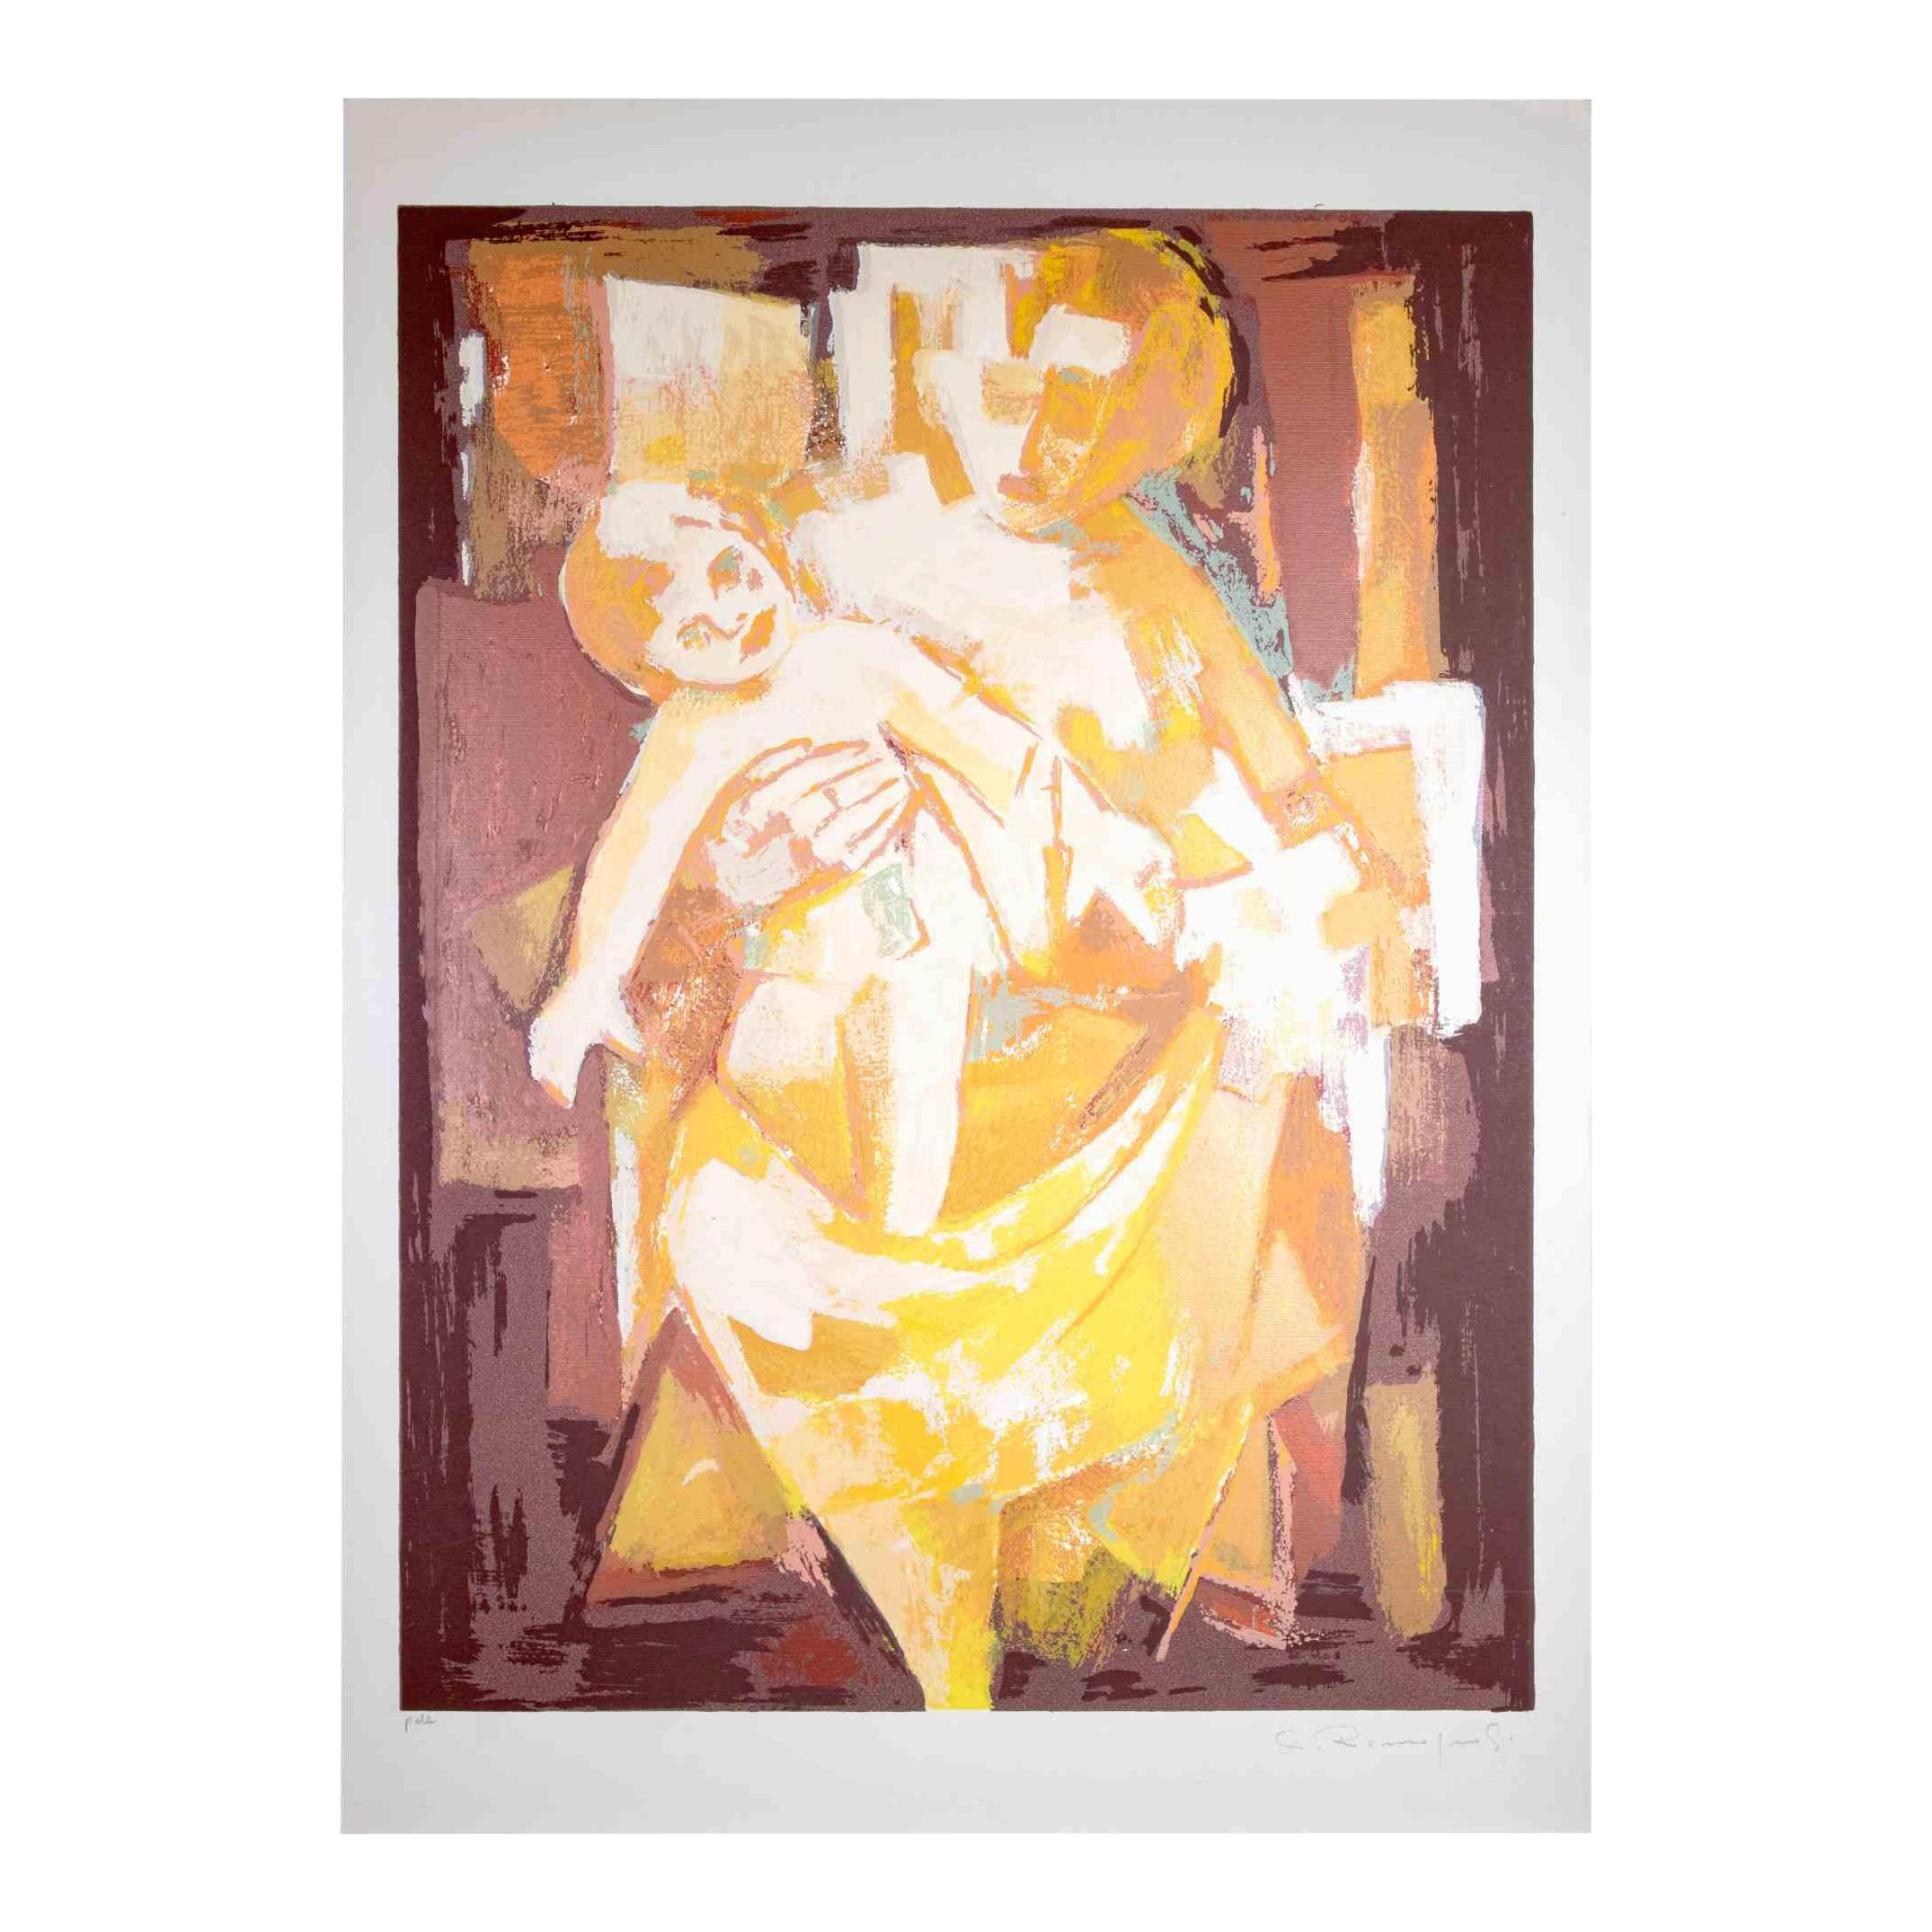 Mother and Child is a Lithograph realized by Alfredo Romagnoli in 1970s.

The artwork is in good condition on a white cardboard.

Hand-signed by the artist on the lower right corner.

Alfredo Romagnoli (January 5, 1915 in Genzano di Roma - March 21,